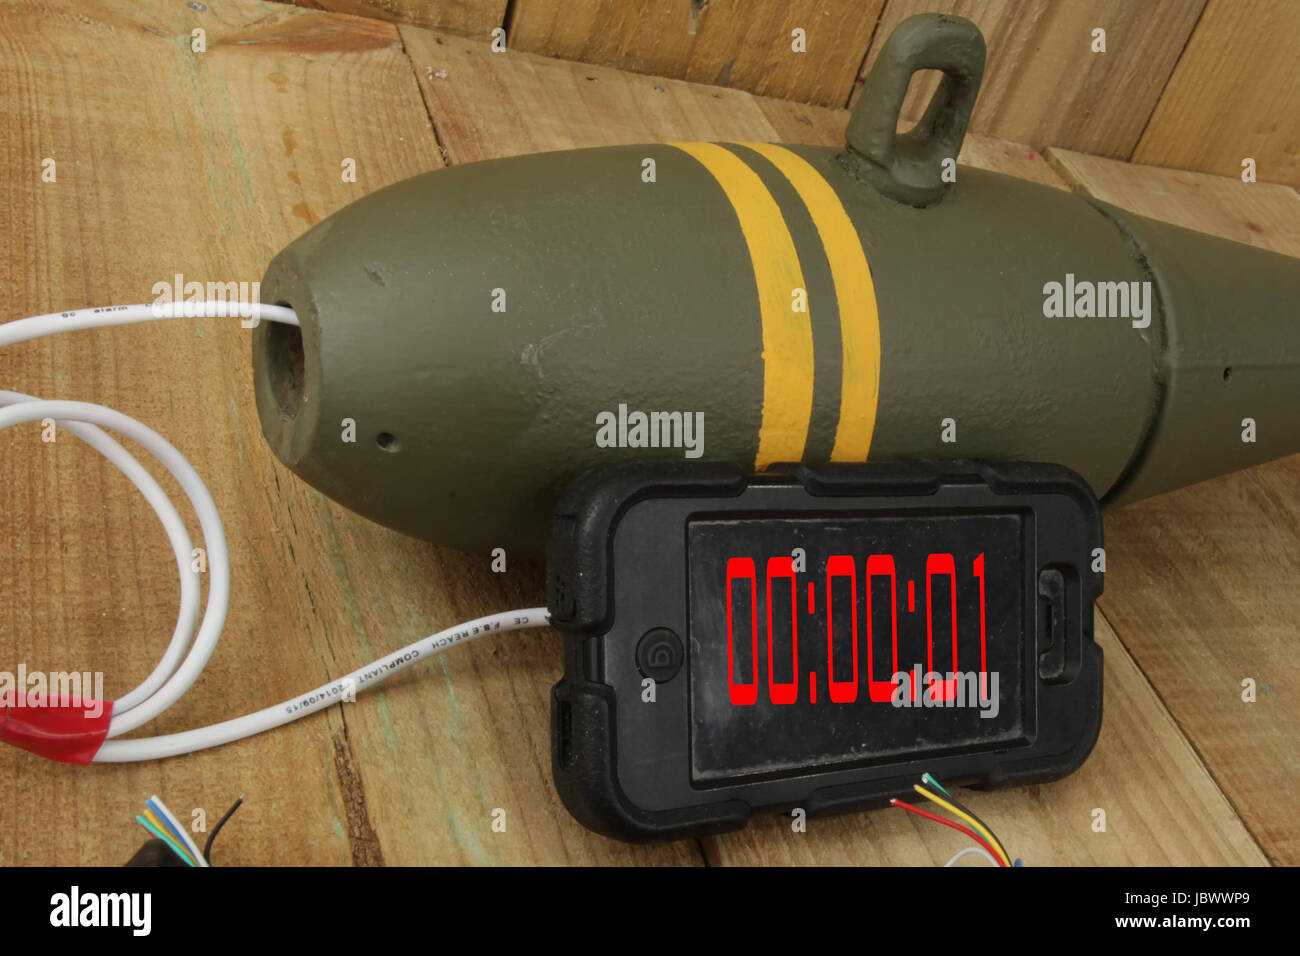 The Improvised Explosive Device Ied